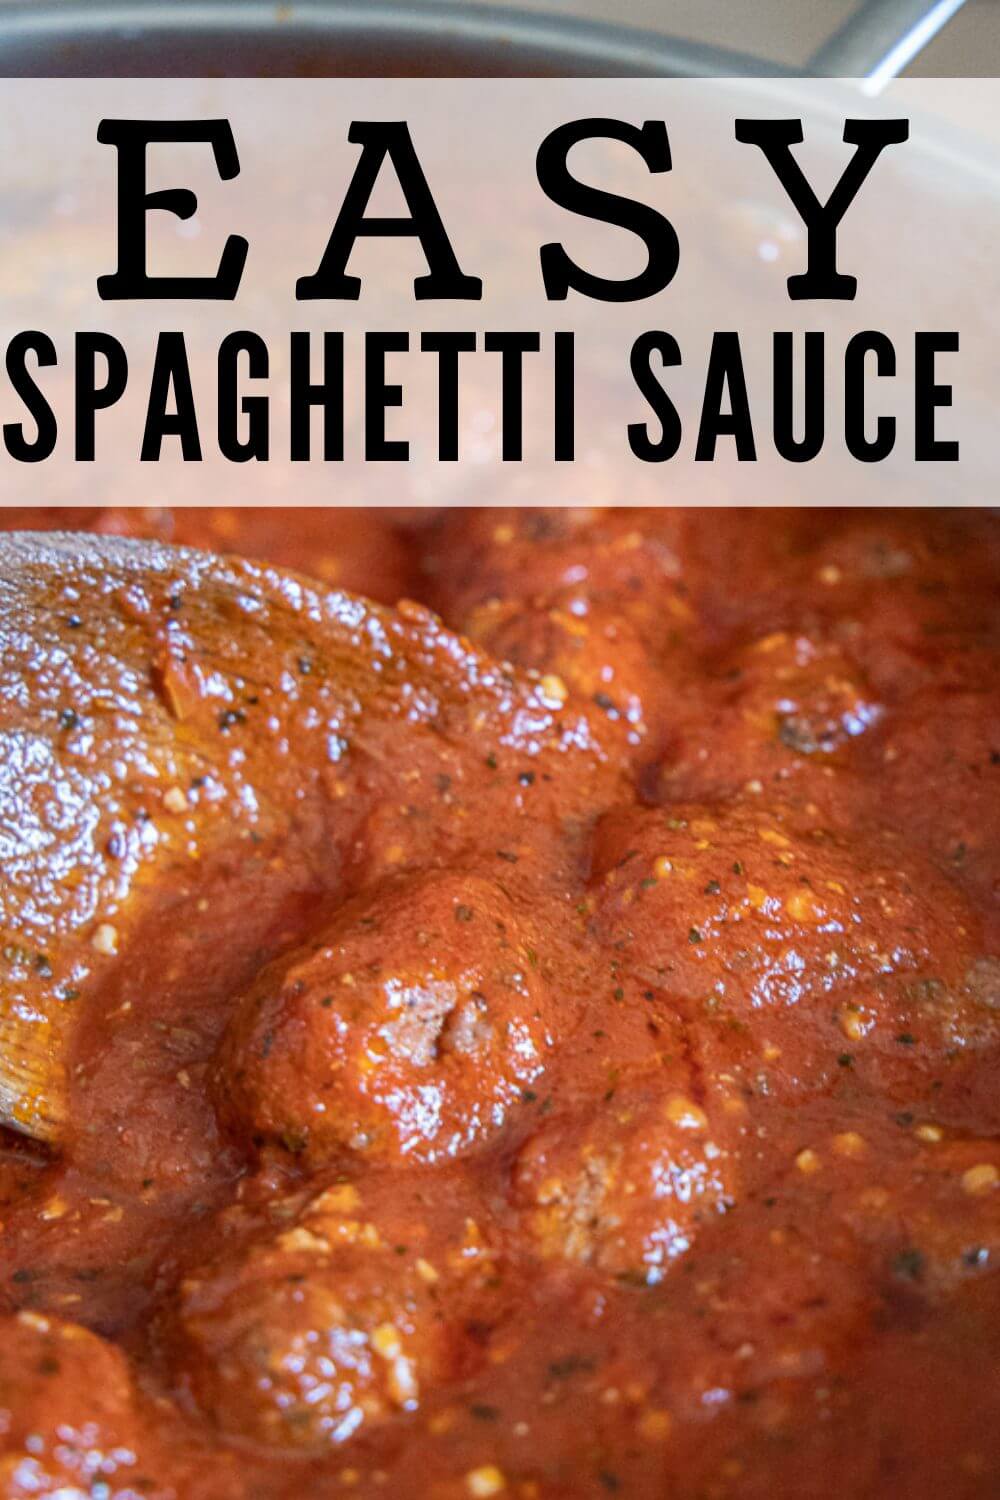 How to make amazing homemade spaghetti sauce with simple ingredients and in less than 30 minutes! It is so much better than store bought and is super easy to make.  You will know exactly what you are feeing your family too. I love being in control of the ingredients in my food.